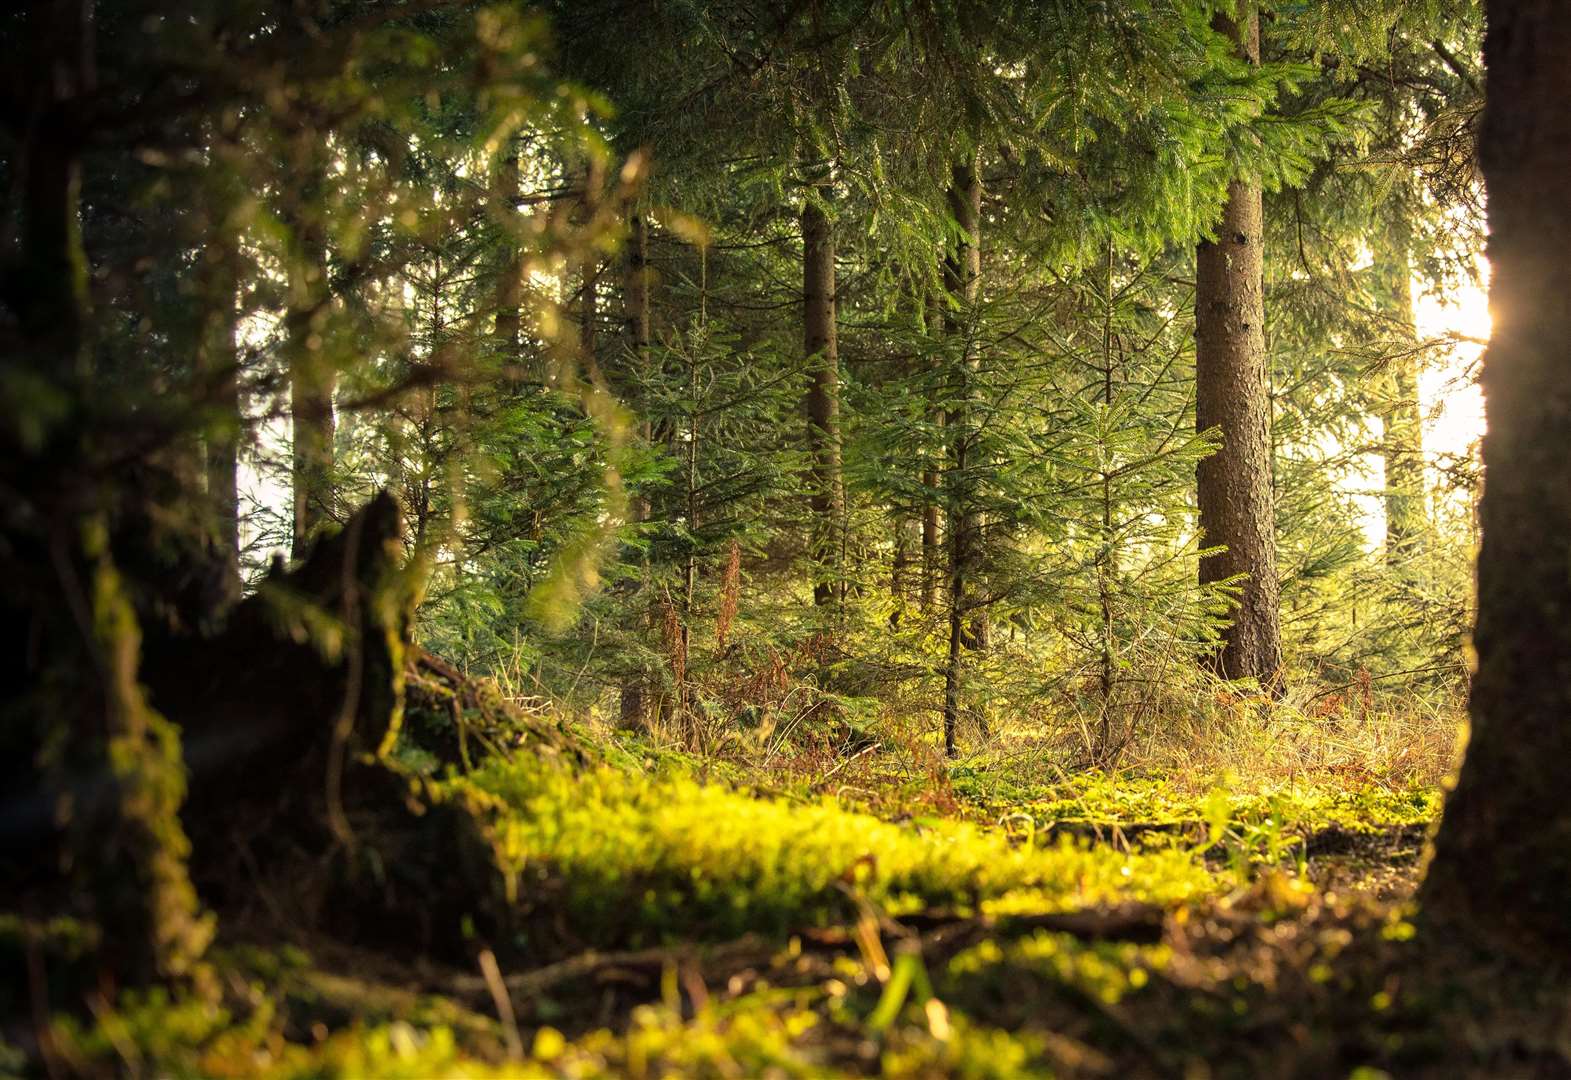 This year, the International Day of Forests will fall on Sunday, March 21. Picture: Nejc Košir from Pexels.